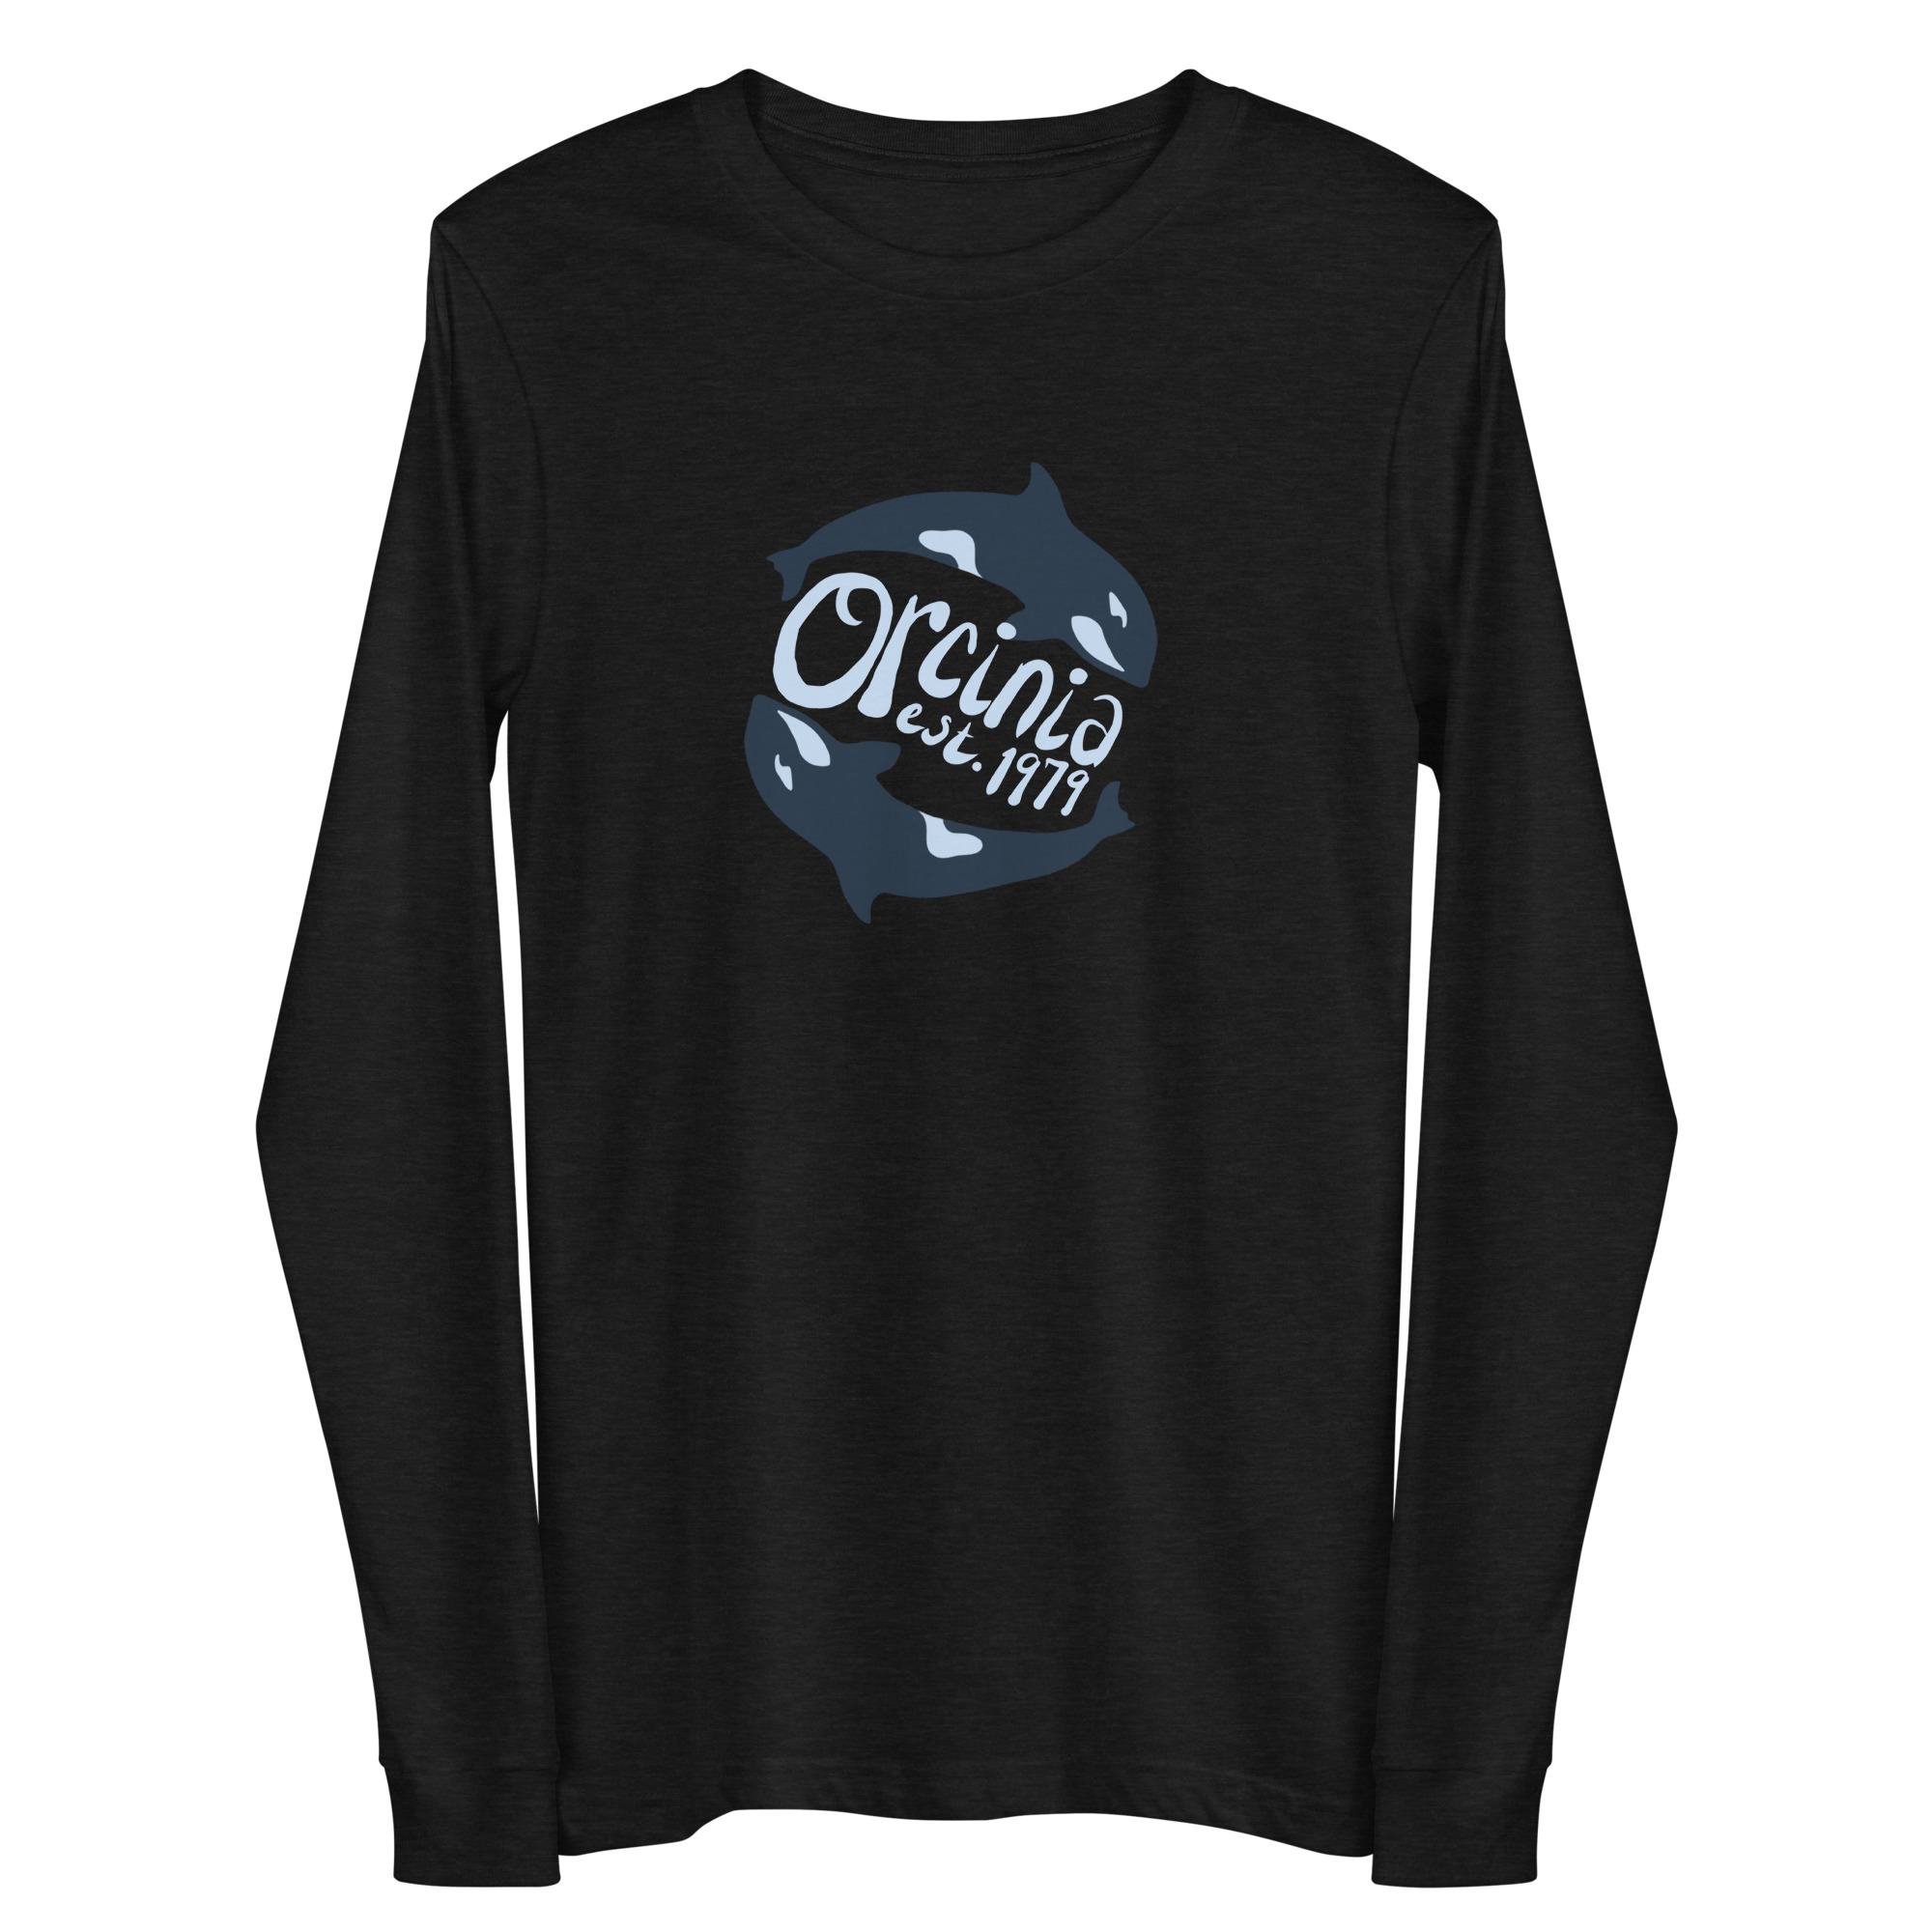 Black heather long-sleeve t-shirt featuring two orca whales swimming in a circle. Text between them reads "Orcinia, est. 1979."